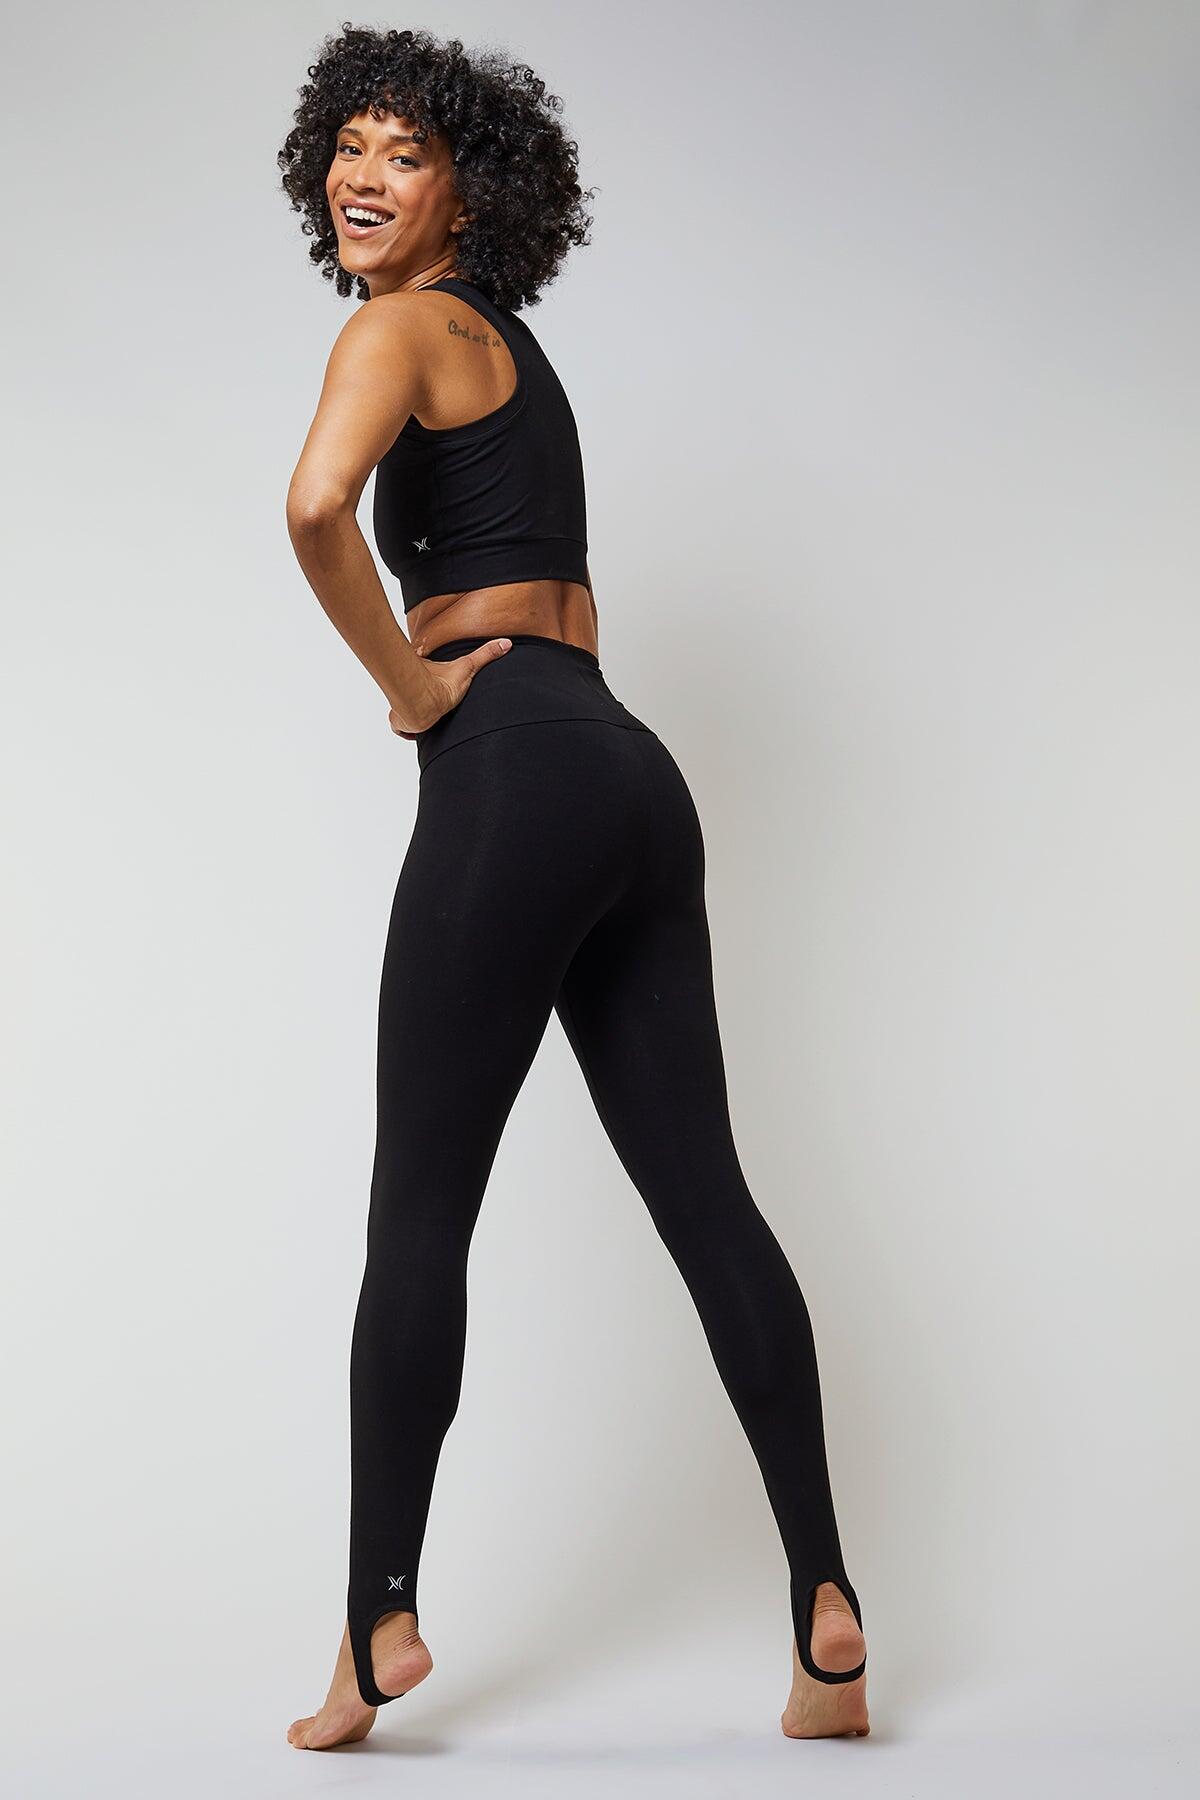 Extra Strong Compression Black Gym Leggings with High Tummy Control– TLC  Sport